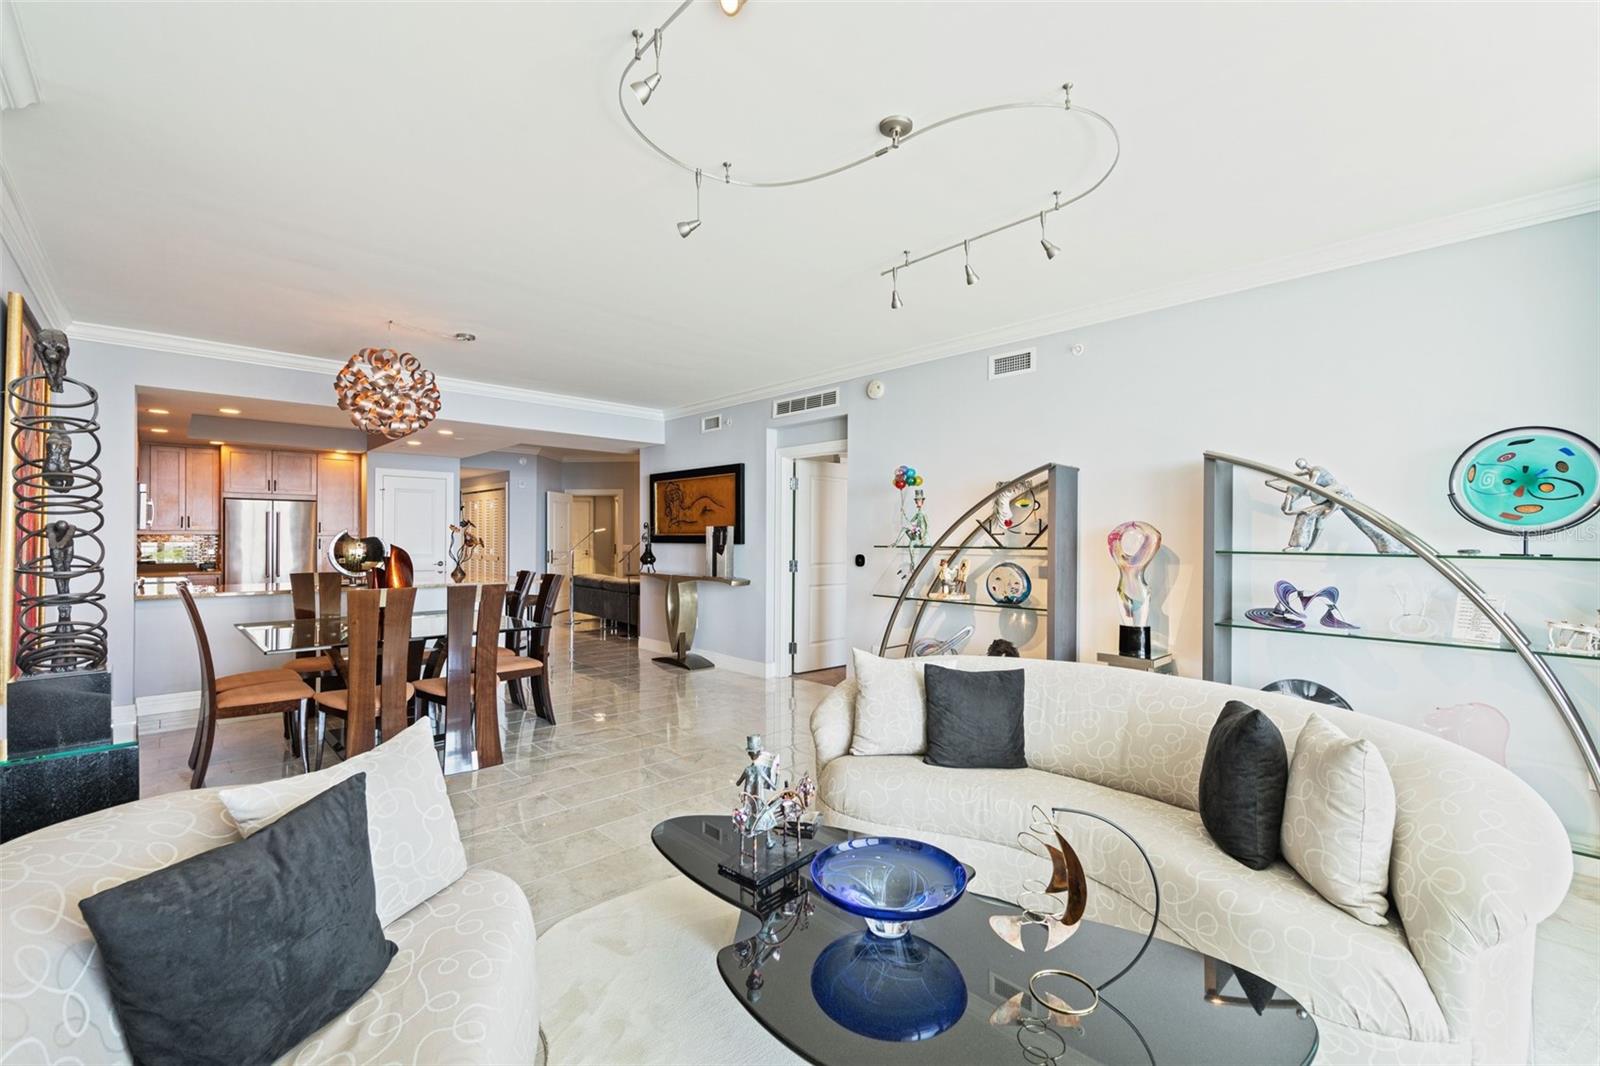 Spacious living area, nice dining, inviting light and bright!